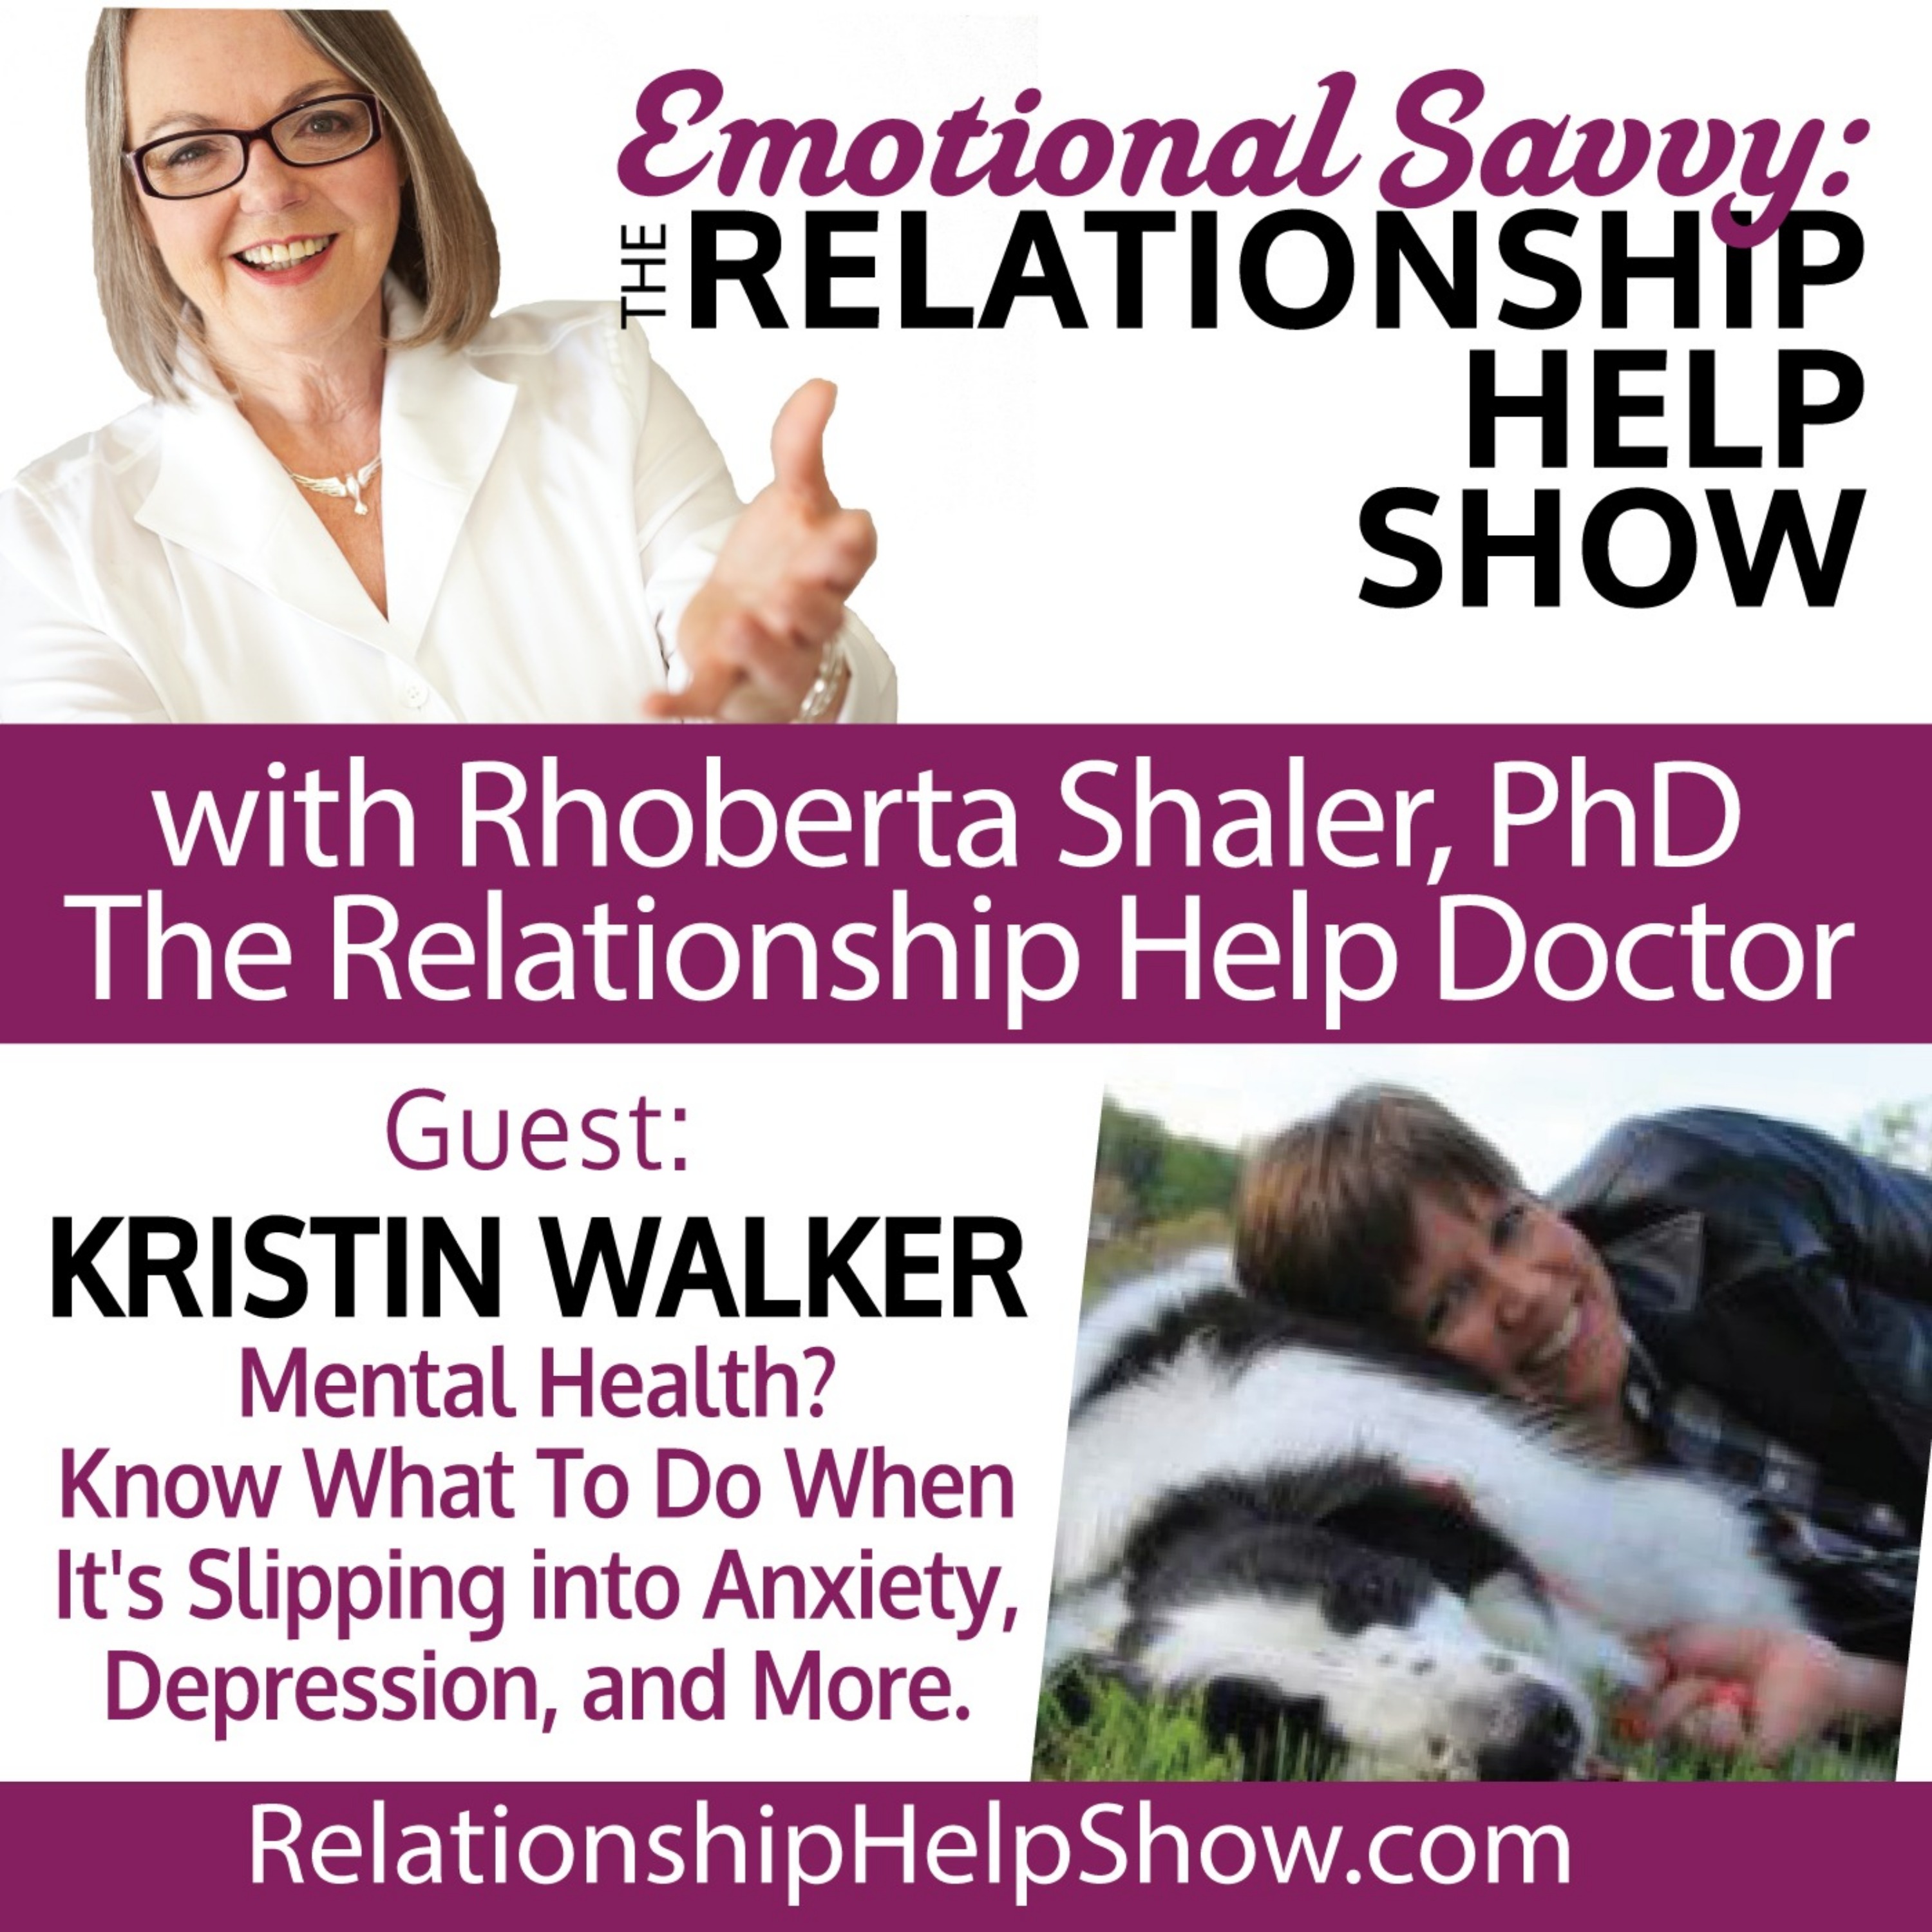 Mental Health: Know What To Do When It's Slipping Into Anxiety, Depression, or More  GUEST: Kristin Walker